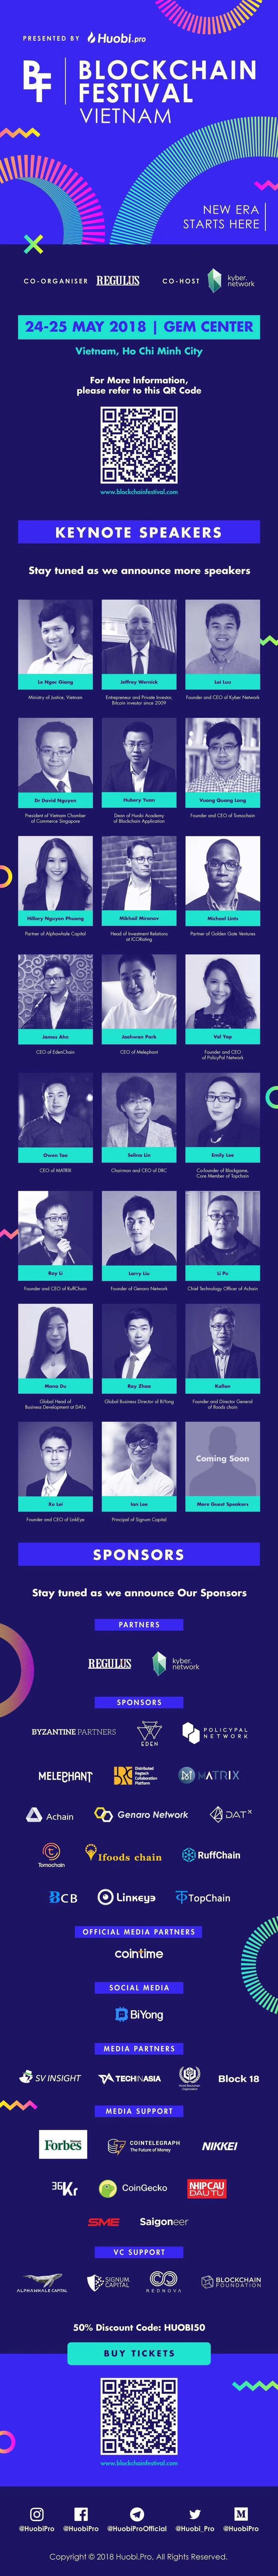 Blockchain Festival Vietnam, 24-25 May 2018, presented by Huobi Pro, First Release of Global Blockchain Industry Developments Report 1H 2018